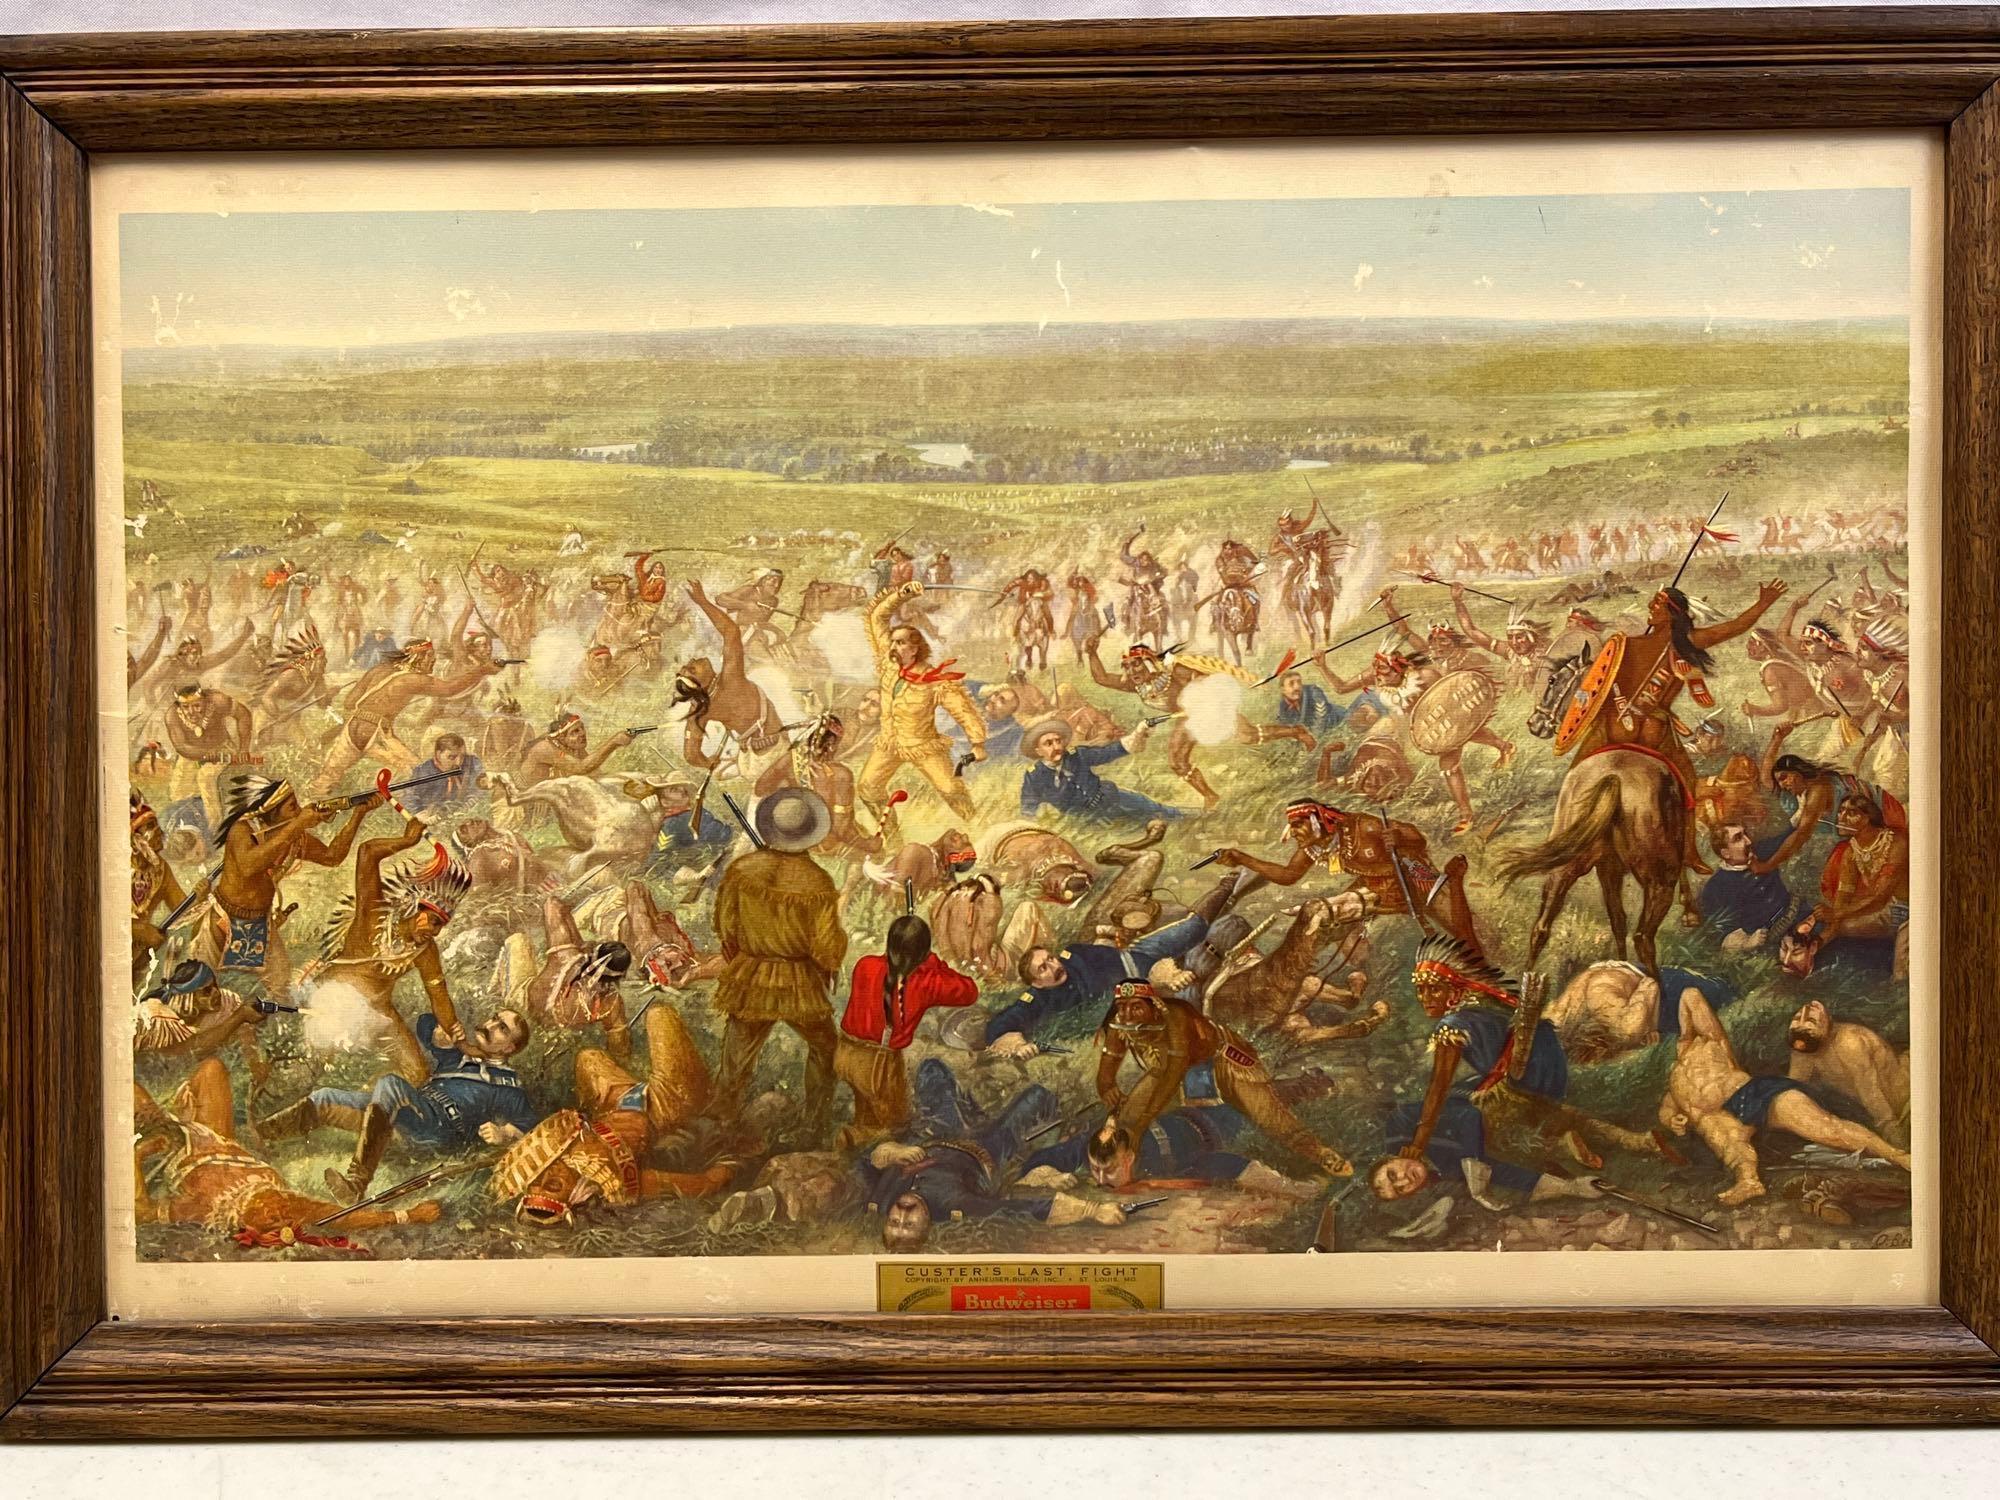 Framed Lithograph "Custer's Last Fight" Copyright by Anheuser-Busch, Inc. "Budweiser"